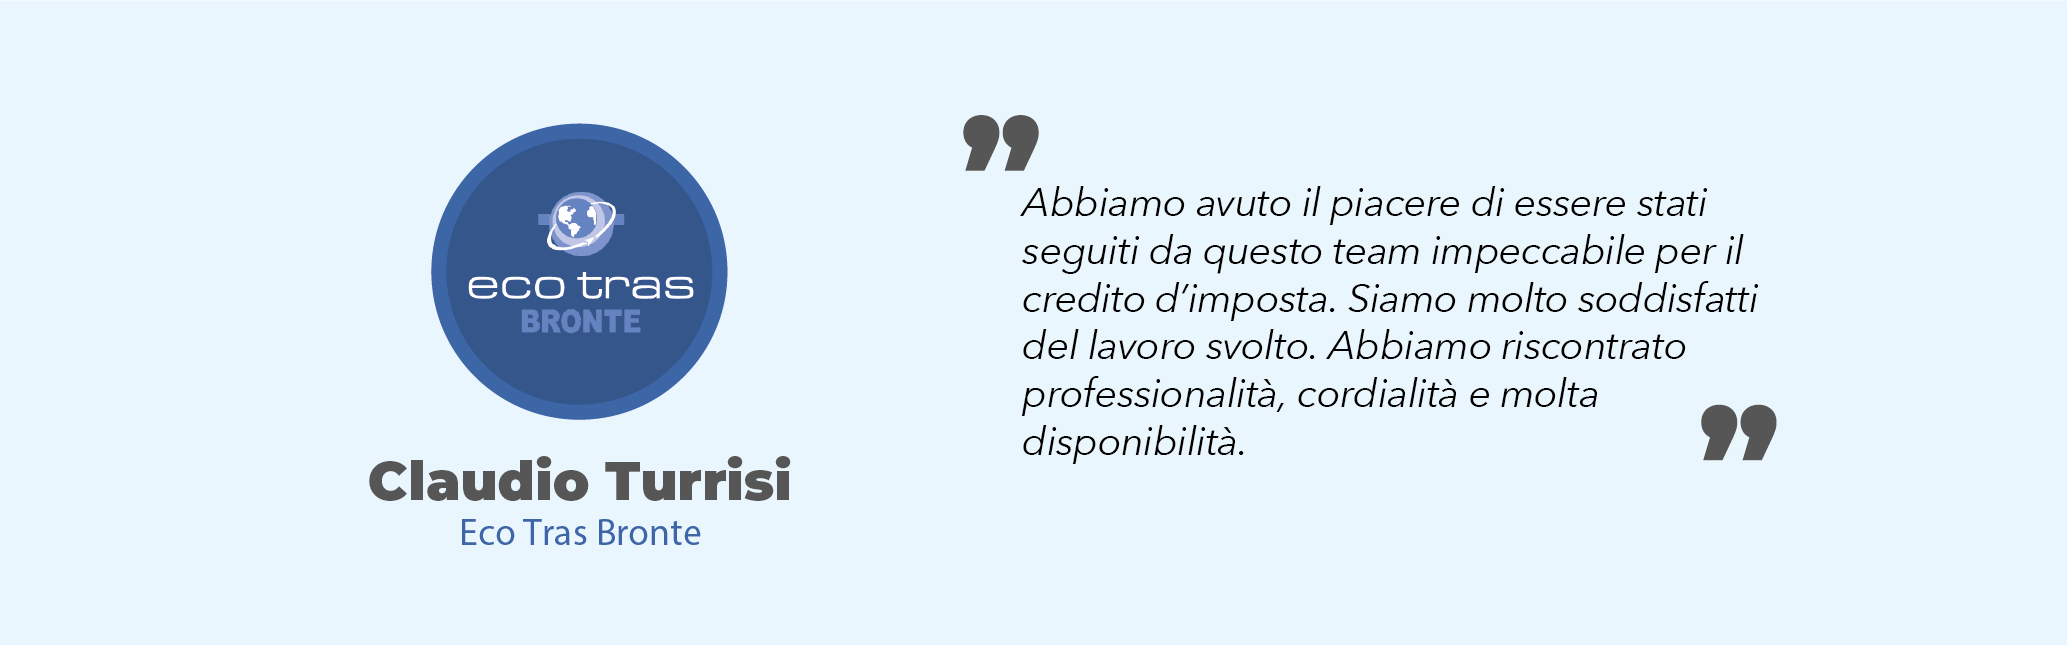 Claudio-Turrisi-Eco-tras-referenze-ransomtax